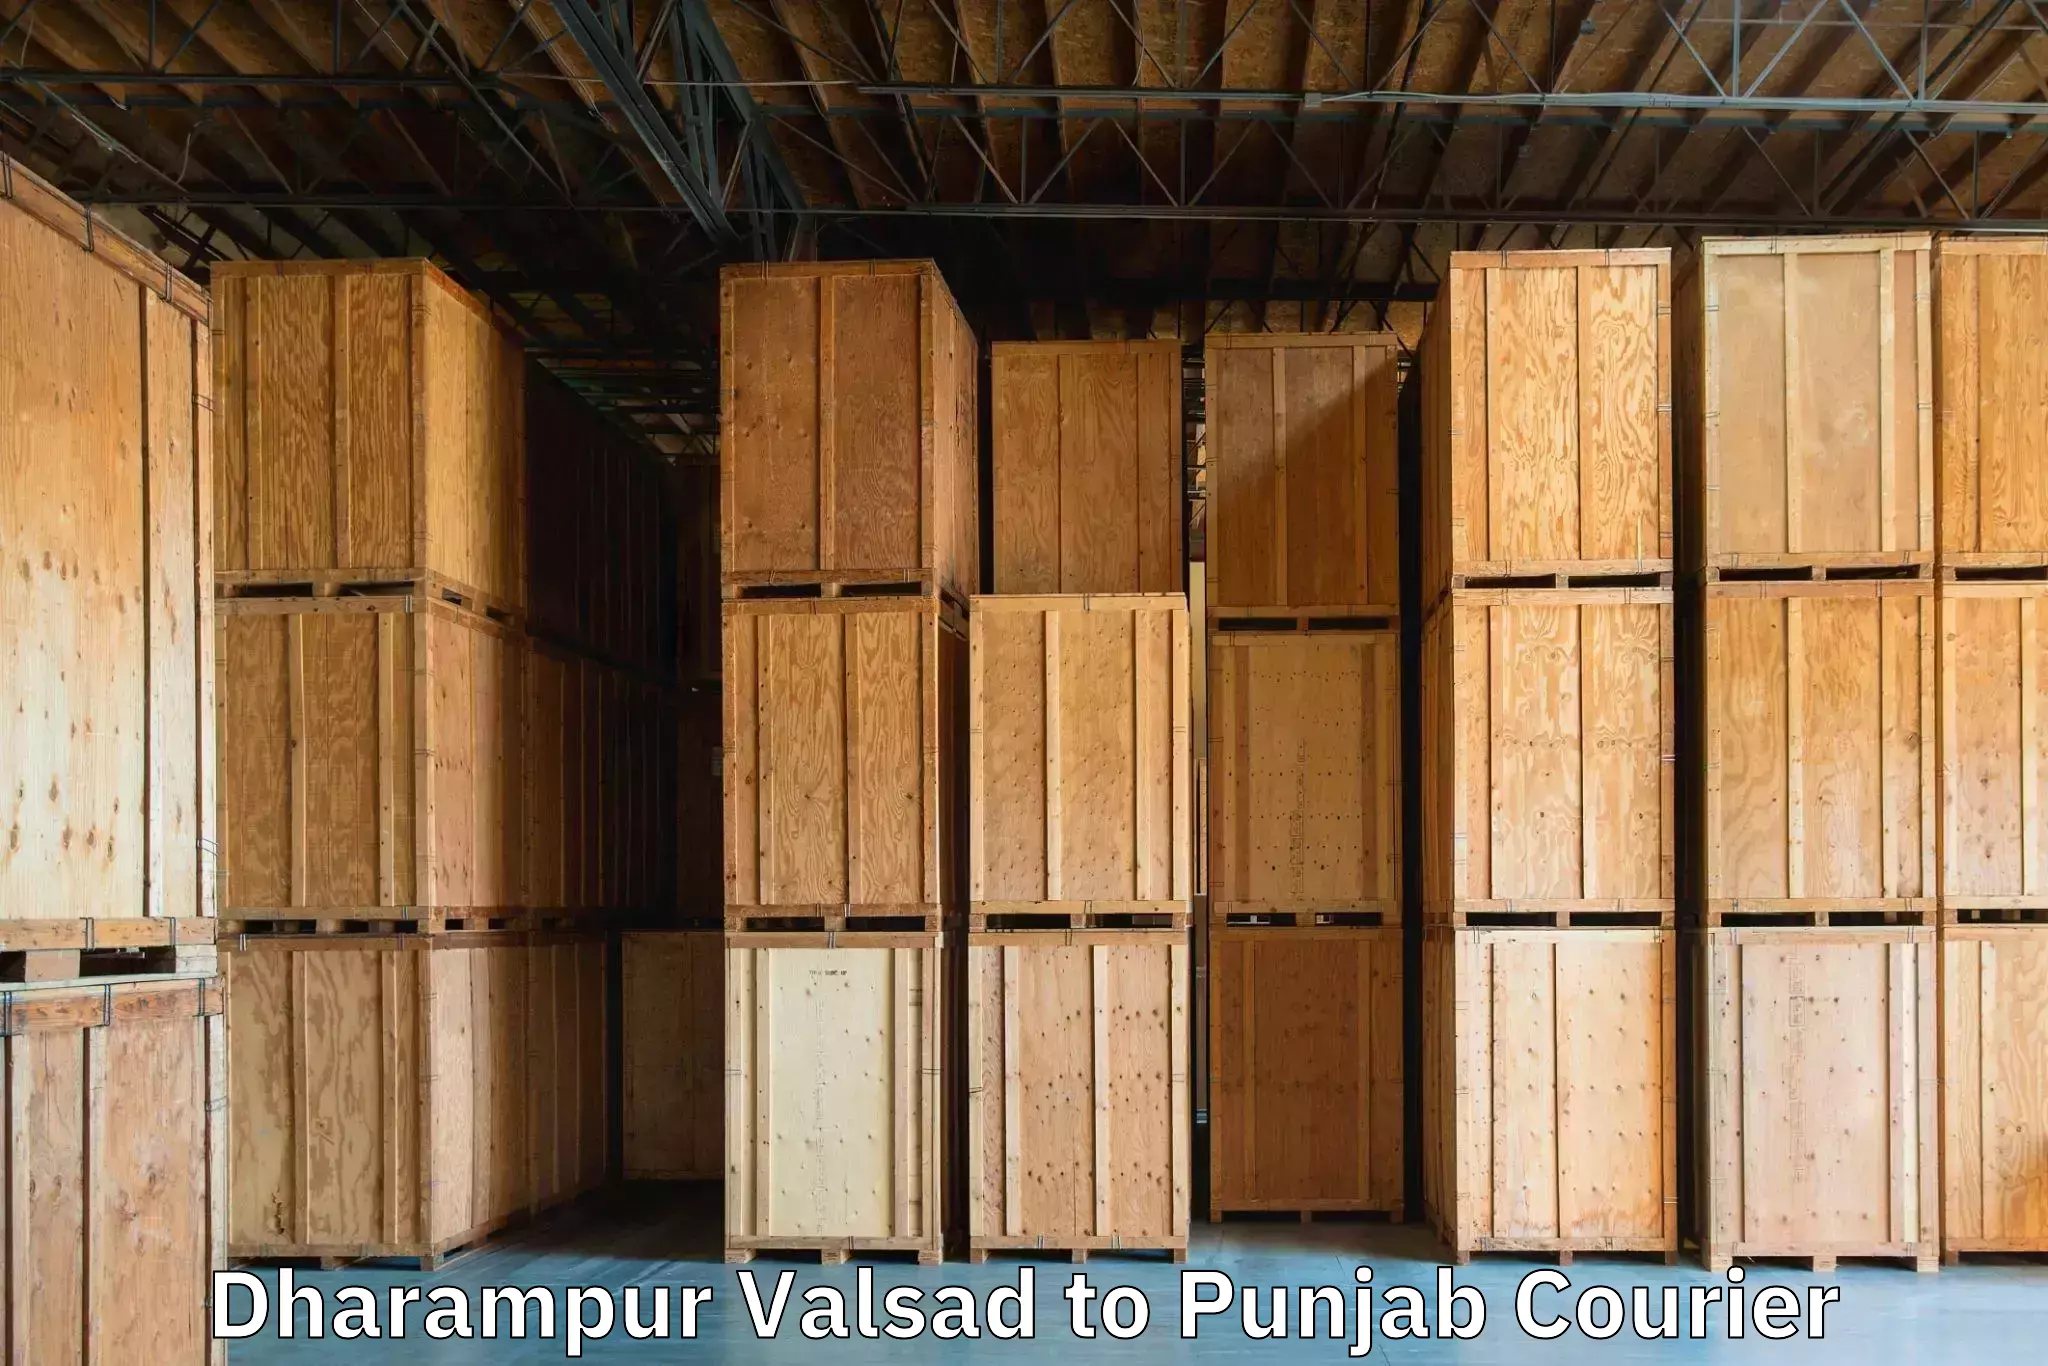 Baggage shipping advice in Dharampur Valsad to Ajnala